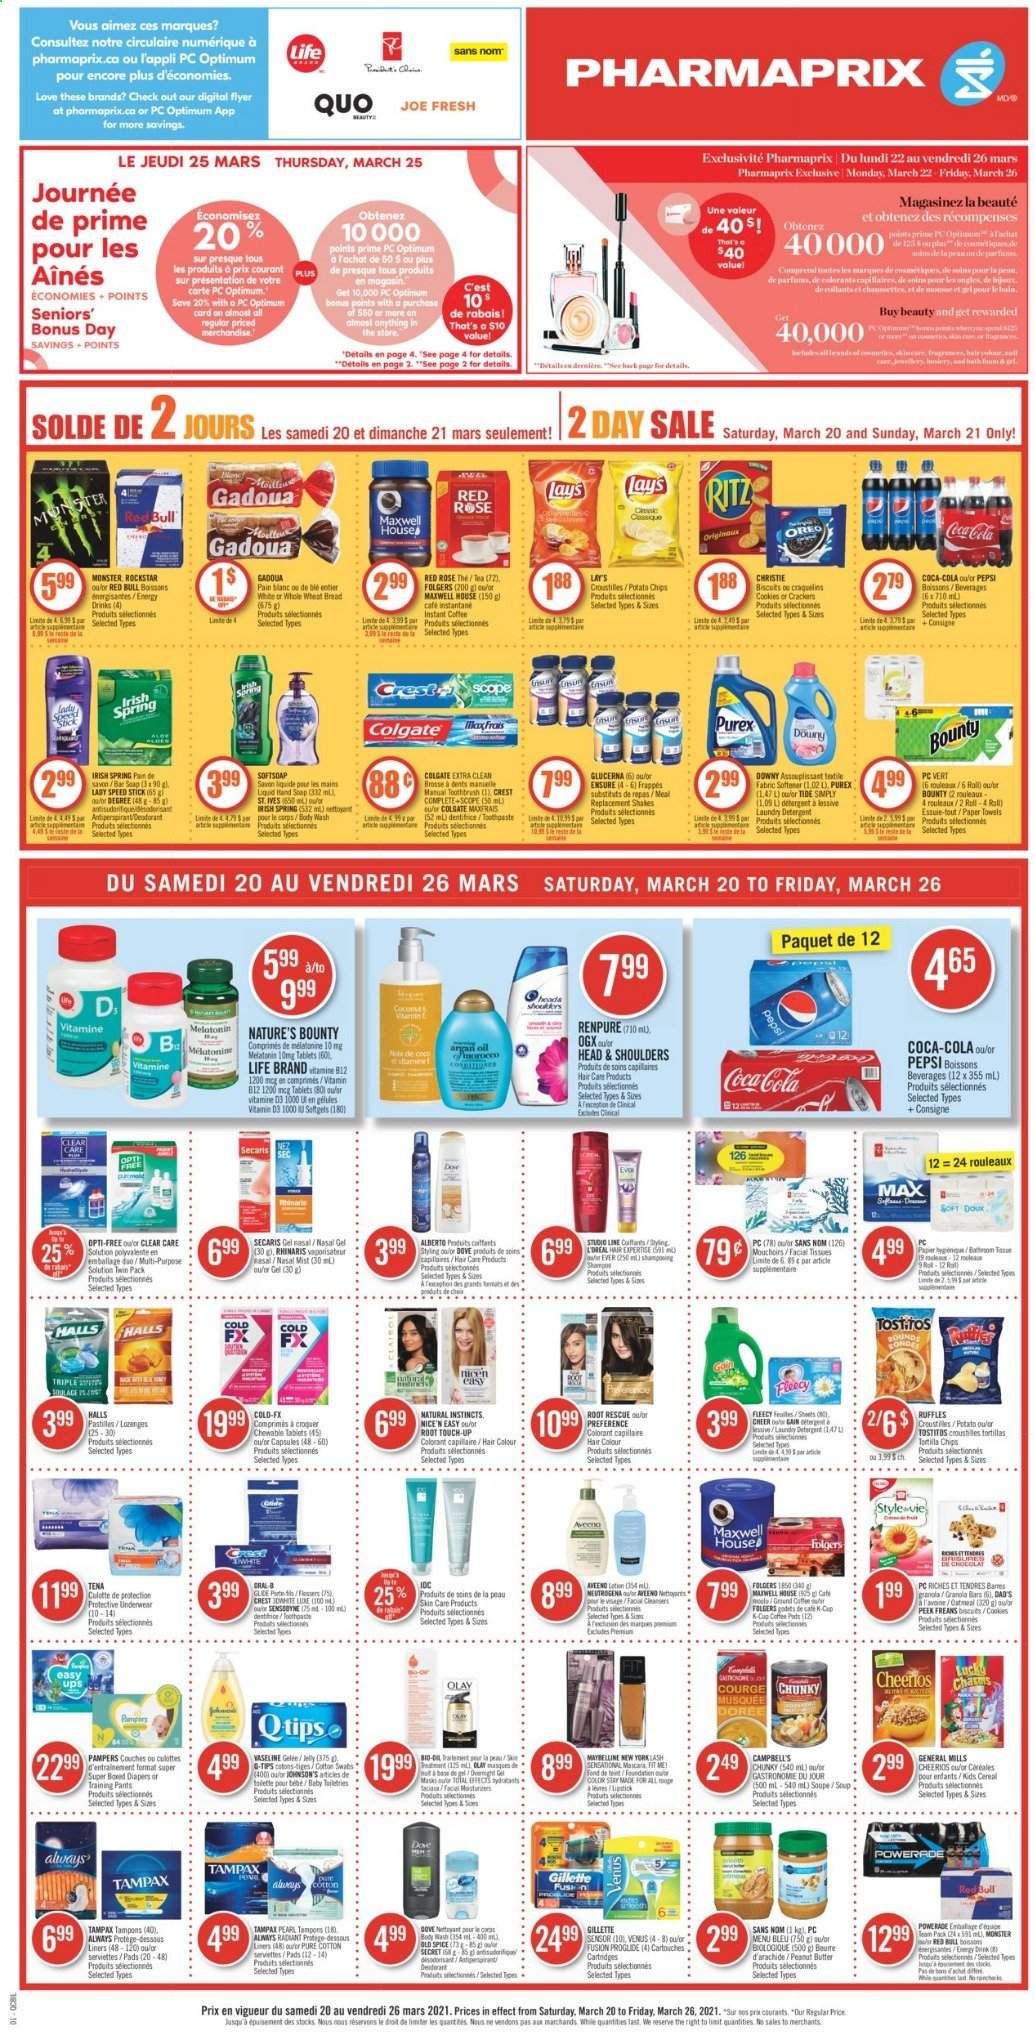 thumbnail - Pharmaprix Flyer - March 20, 2021 - March 26, 2021 - Sales products - wheat bread, Campbell's, soup, shake, cookies, Halls, Mars, crackers, pastilles, RITZ, tortilla chips, potato chips, Lay’s, Ruffles, Tostitos, oatmeal, cereals, Cheerios, granola bar, oil, peanut butter, Coca-Cola, Powerade, Pepsi, energy drink, Monster, Red Bull, Rockstar, Maxwell House, instant coffee, Folgers, rosé wine, pants, nappies, Johnson's, baby pants, Aveeno, tissues, Gain, Tide, laundry detergent, Purex, body wash, Softsoap, hand soap, soap bar, soap, toothpaste, Crest, tampons, facial tissues, L’Oréal, Olay, OGX, Root Touch-Up, hair color, body lotion, Speed Stick, Venus, cup, paper, rose, Clear Care, Melatonin, Nature's Bounty, Glucerna, vitamin B12, vitamin D3, Oreo, Gillette, Maybelline, Neutrogena, Tampax, Head & Shoulders, Pampers, chips. Page 1.